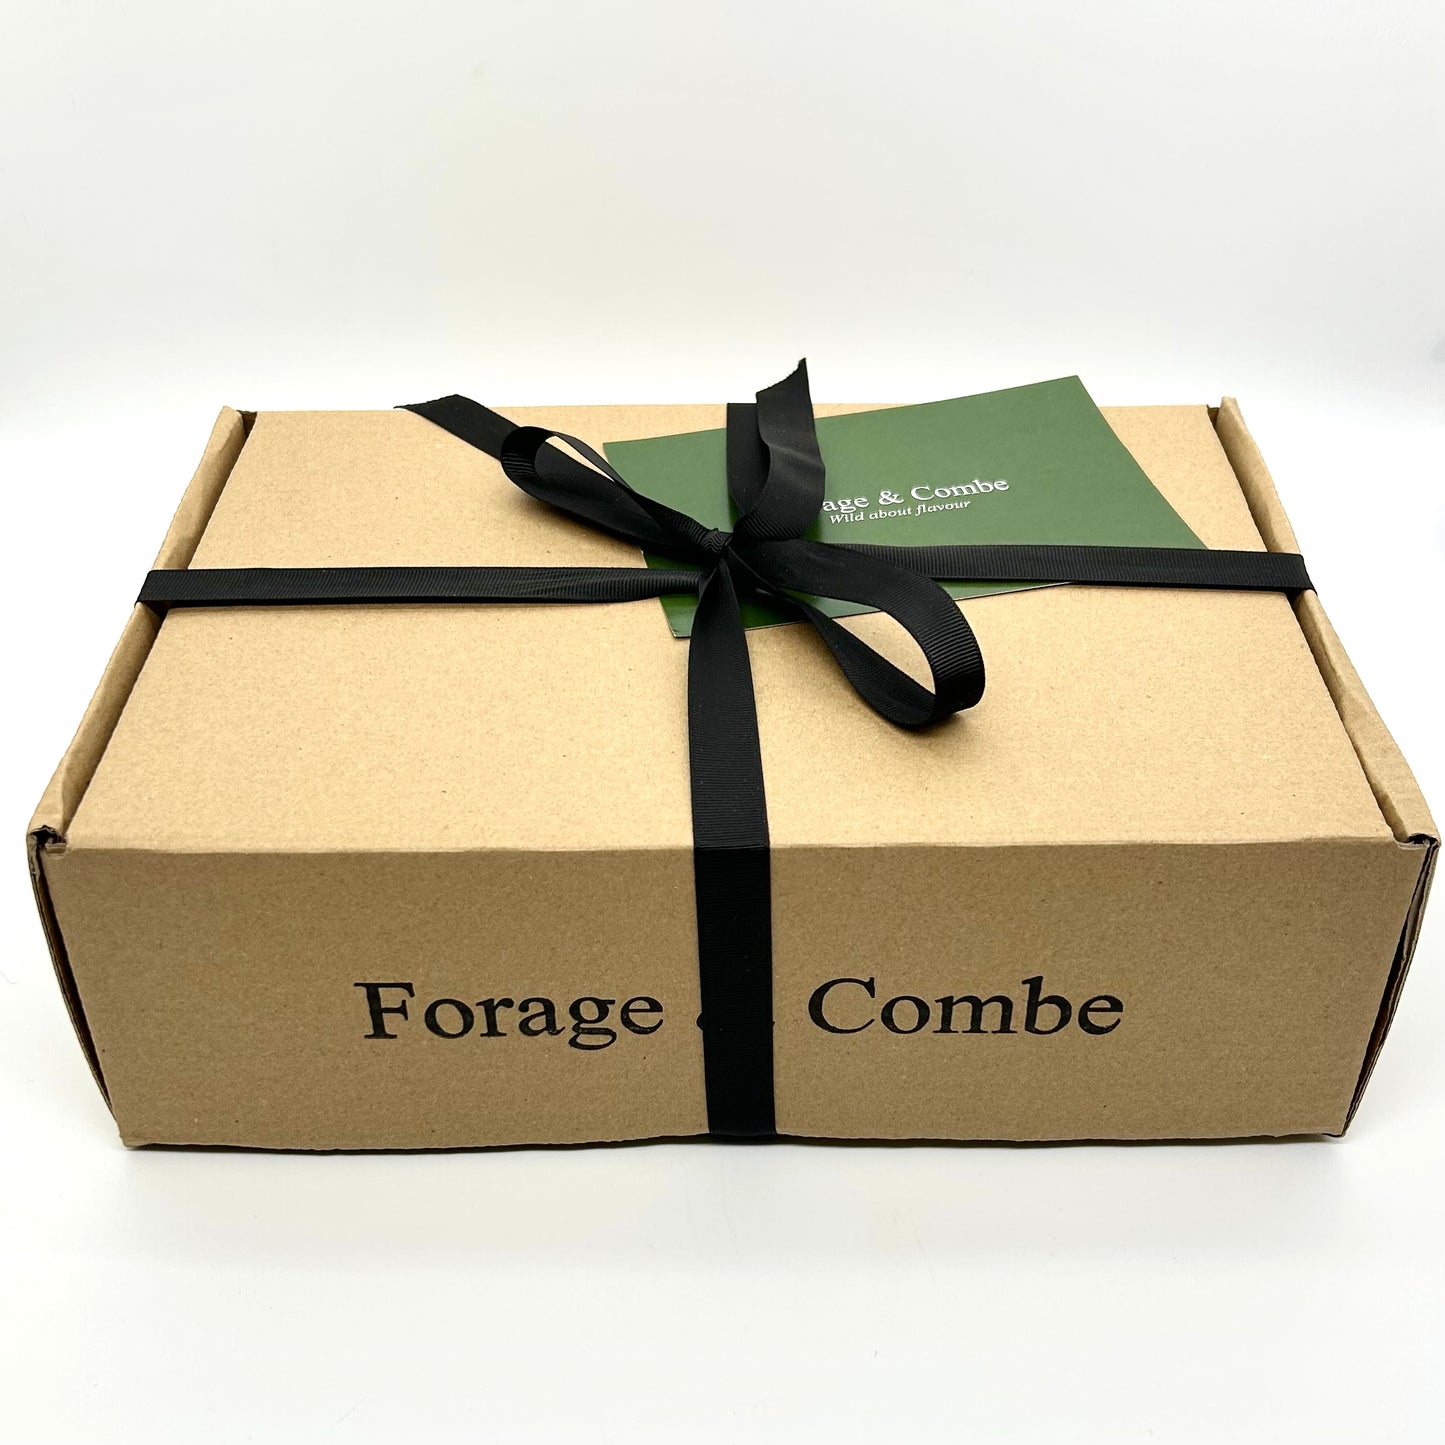 Forage & Combe Gift Box